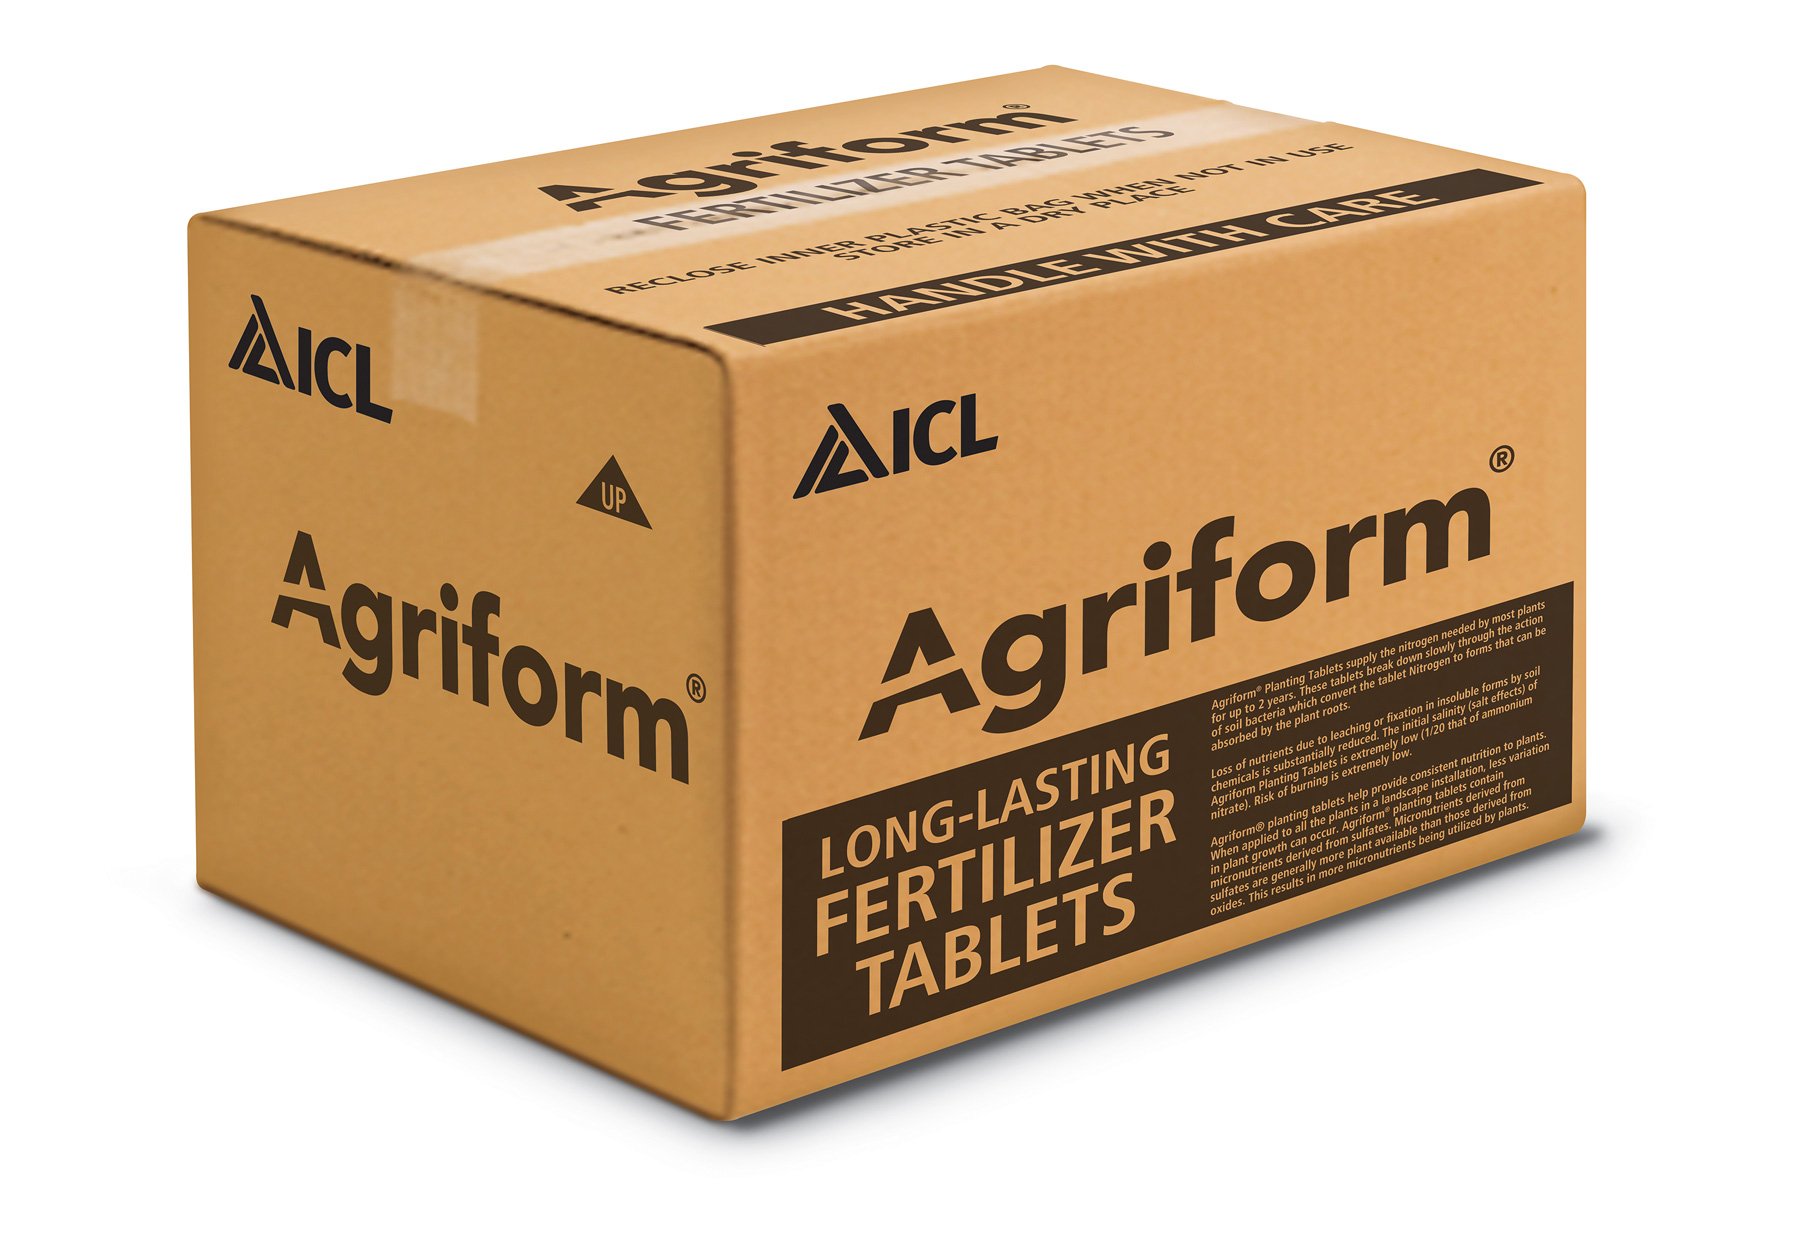 Agriform 20-10-5 1-2yrs 10 gram - 1000 per case - Controlled Release CRF